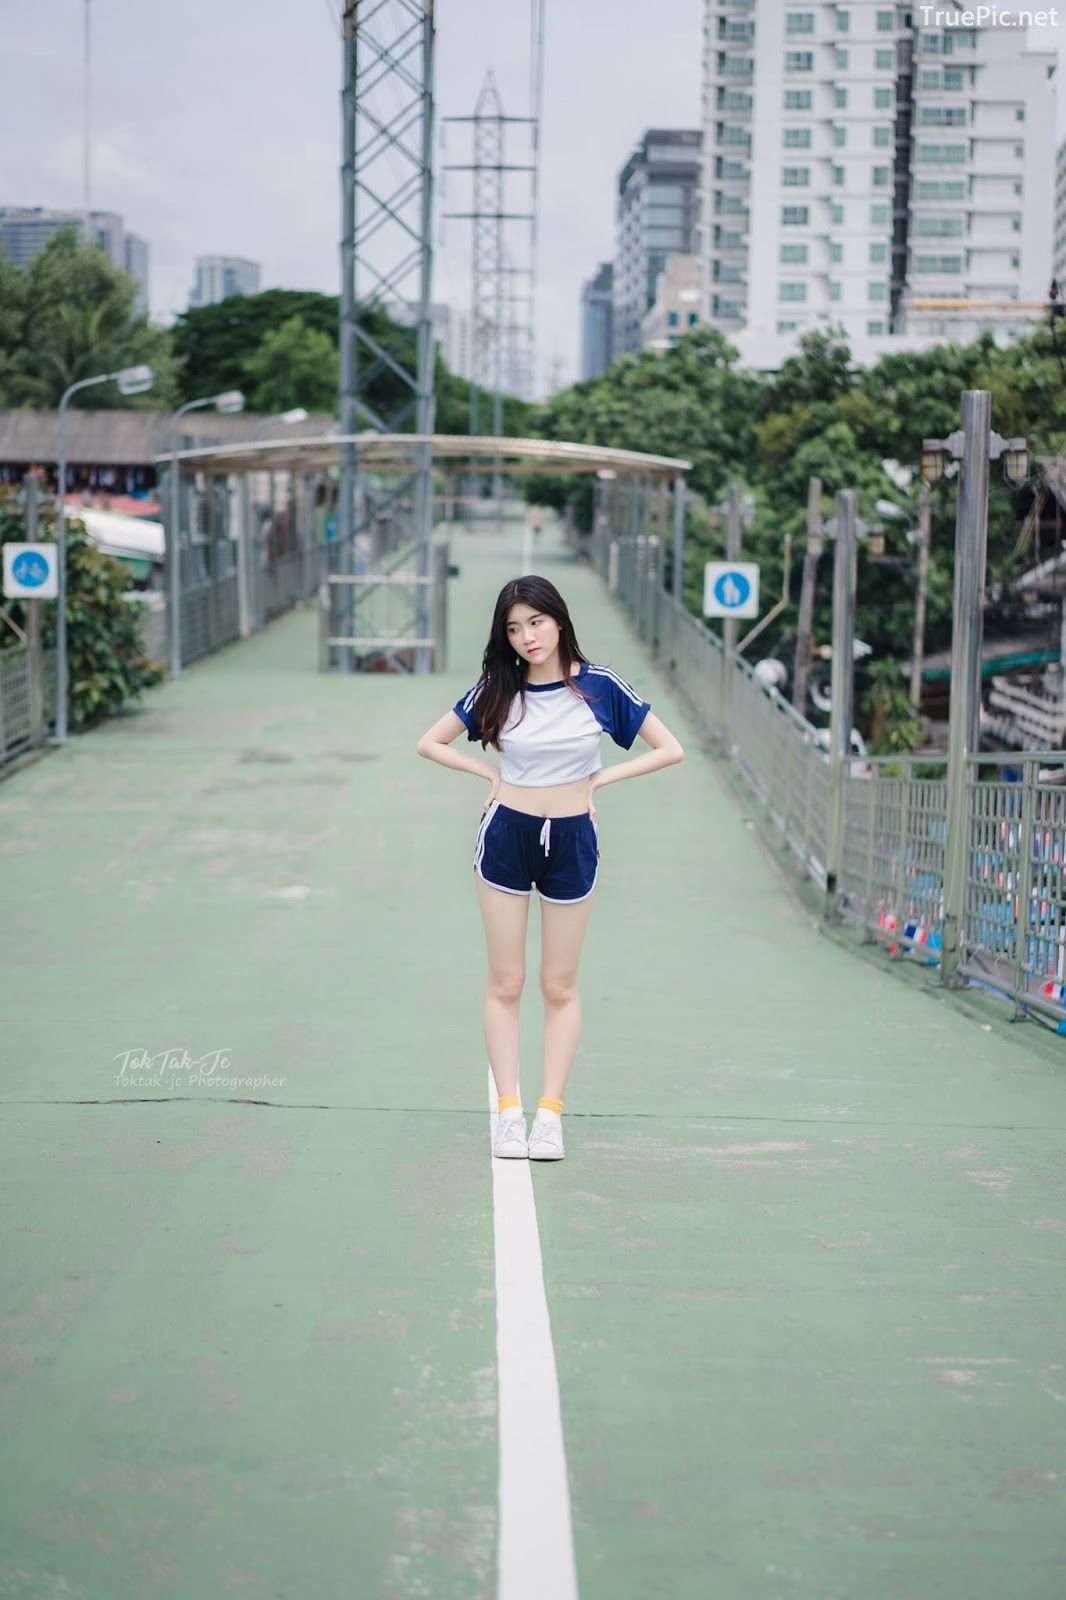 Hot Girl Thailand - Sasi Ngiunwan - Scenes From an Empty City - TruePic.net - Picture 24